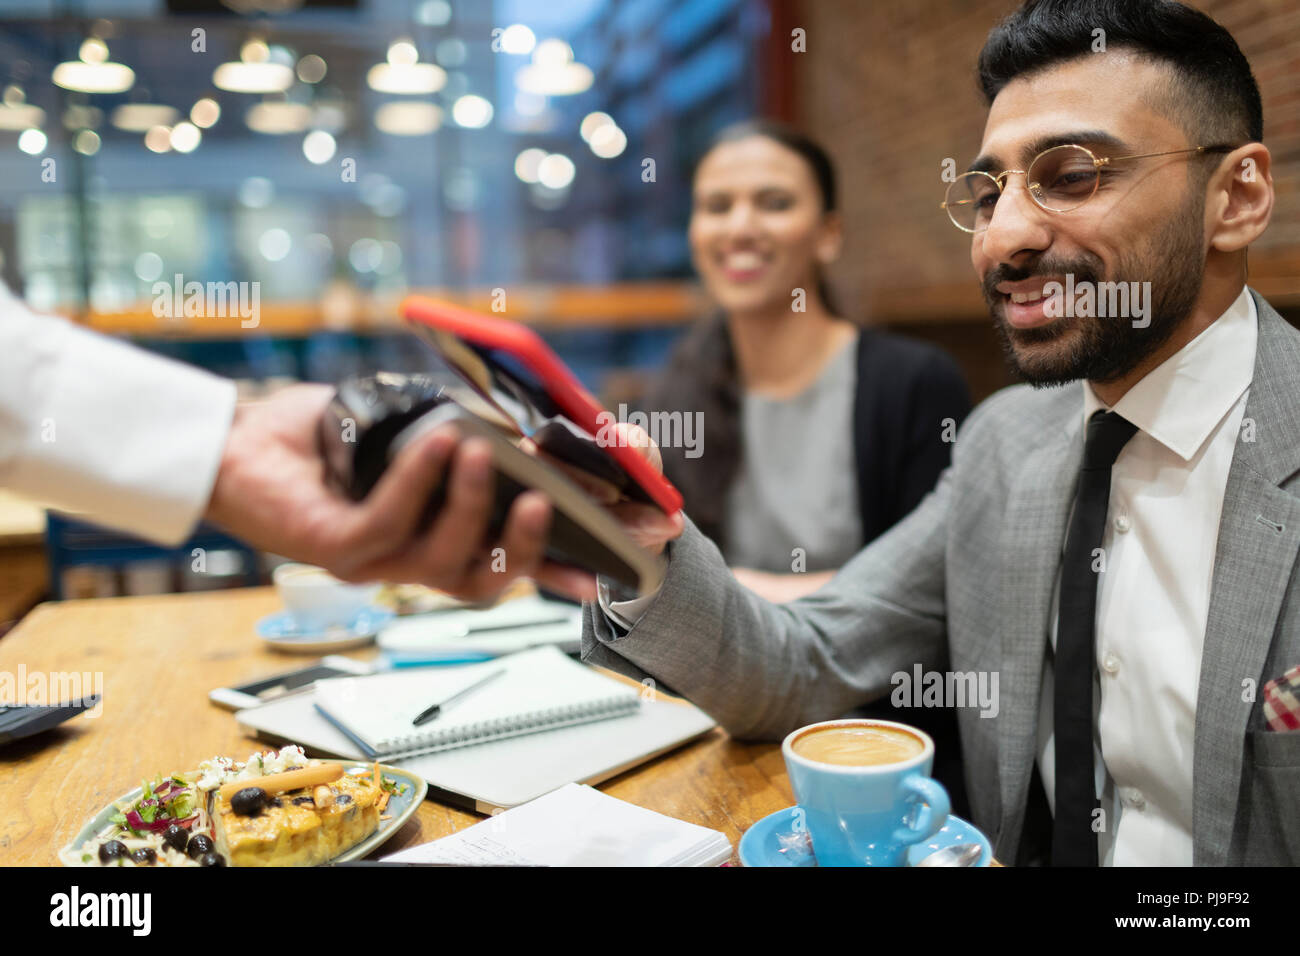 Businessman paying with smart phone contactless payment in cafe Stock Photo